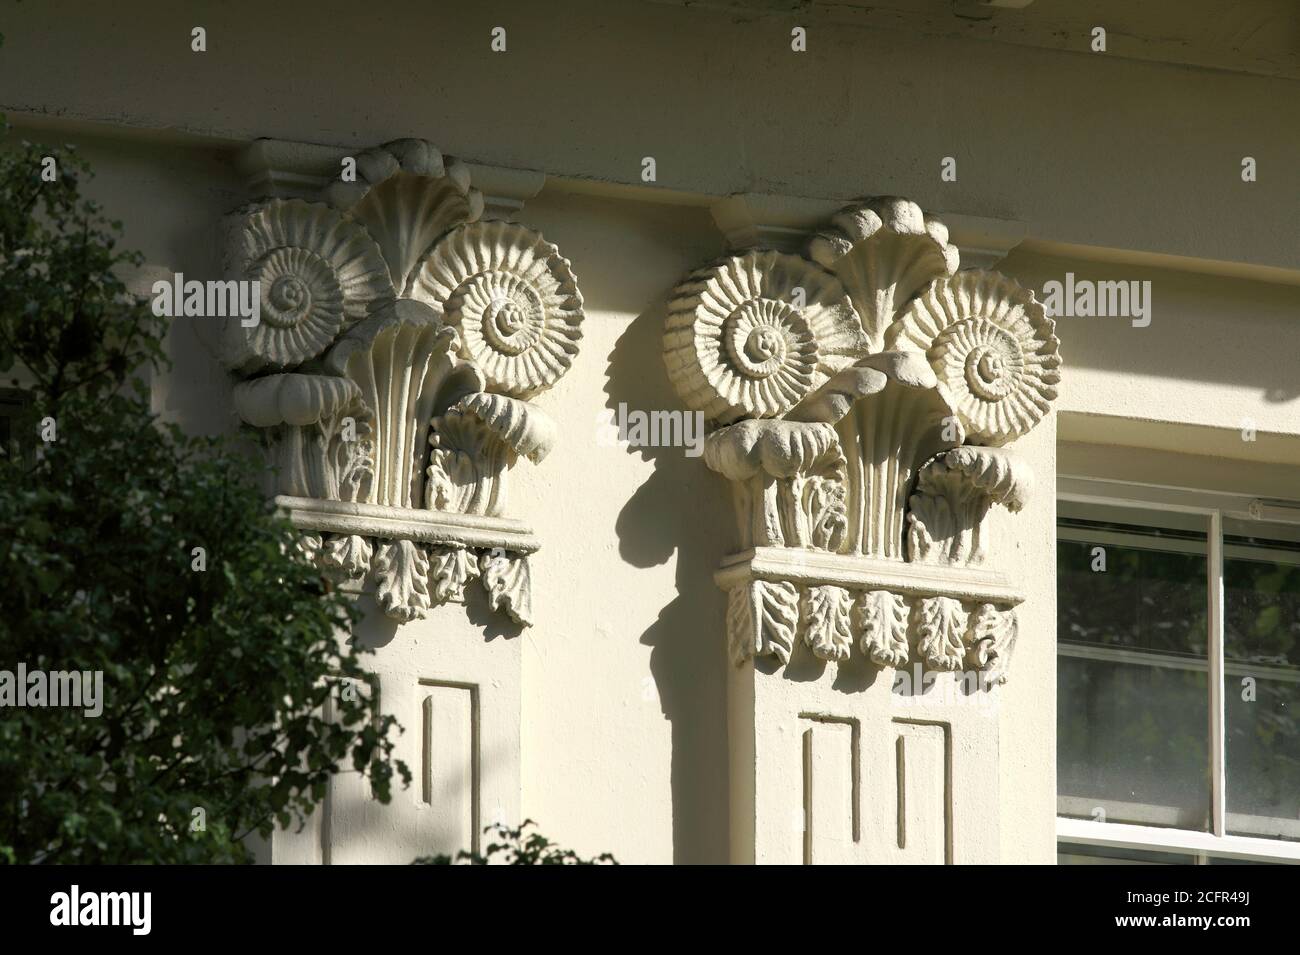 Ammonite capitals on a building designed by architect Amon Wilds, in Richmond Terrace, Brighton. Stock Photo